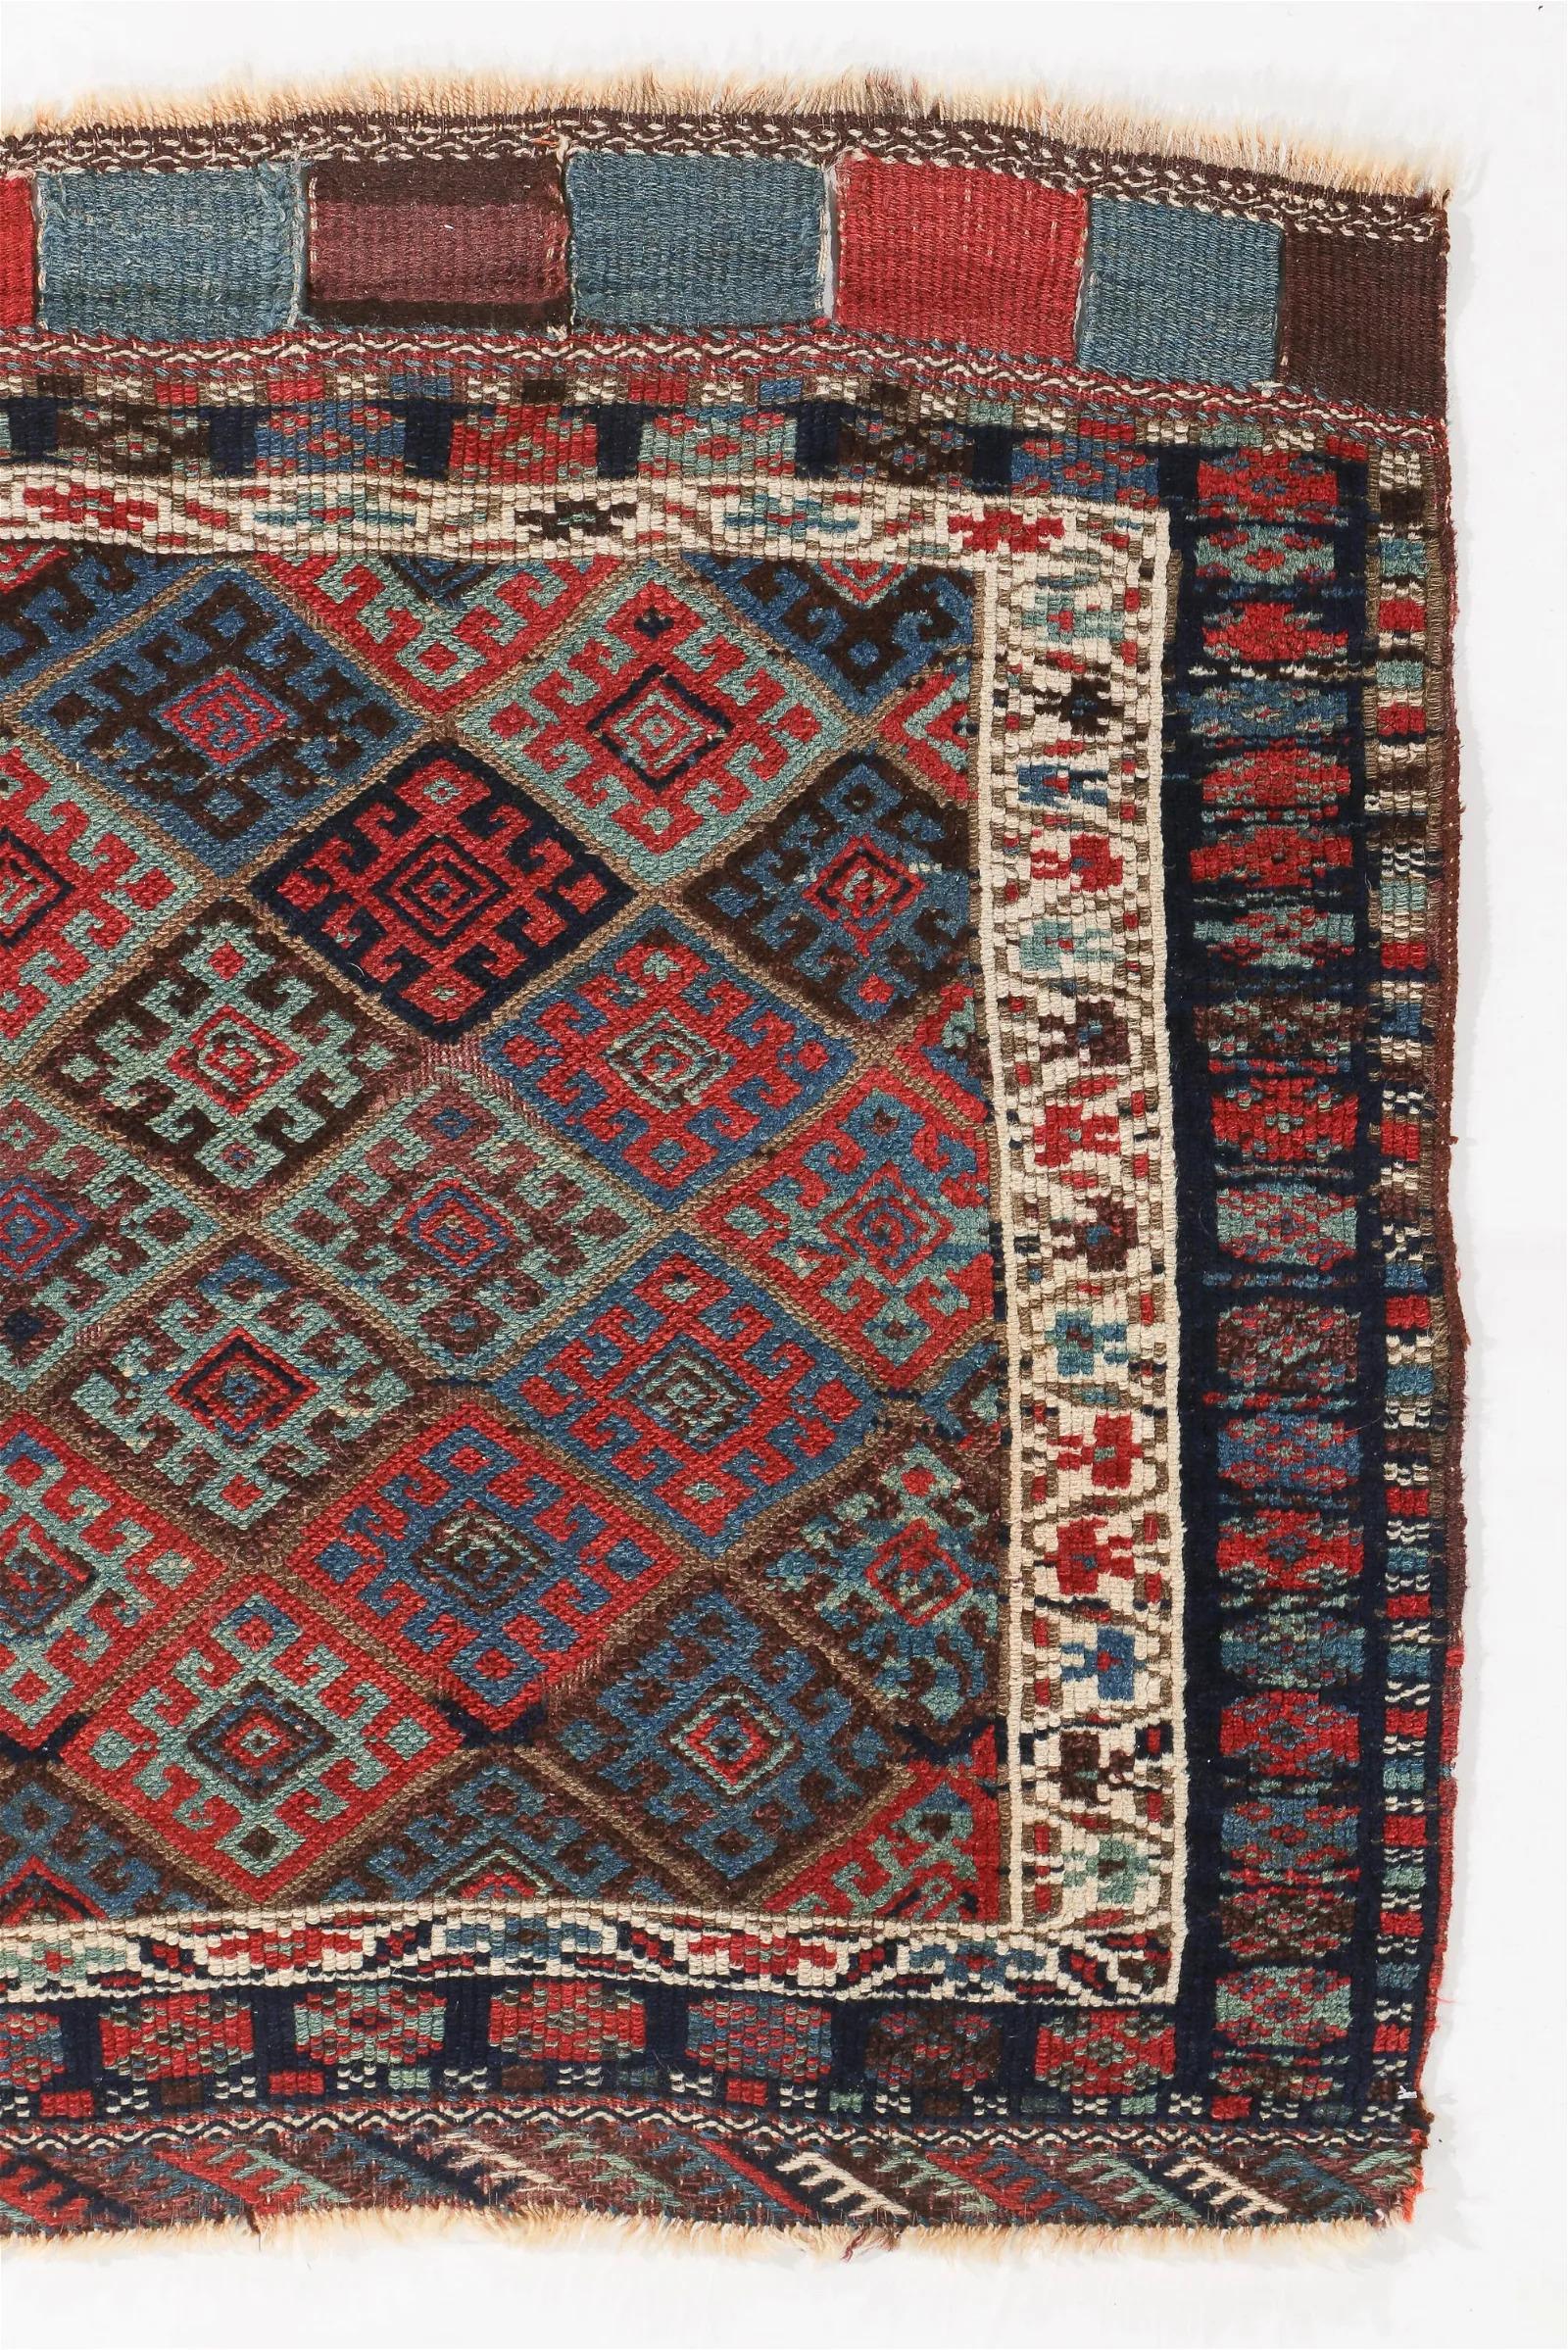 Handmade Antique Persian Collectible Kurdish Jaf Rug 2.9' x 3.3', 1870s - 2B27 In Good Condition For Sale In Bordeaux, FR